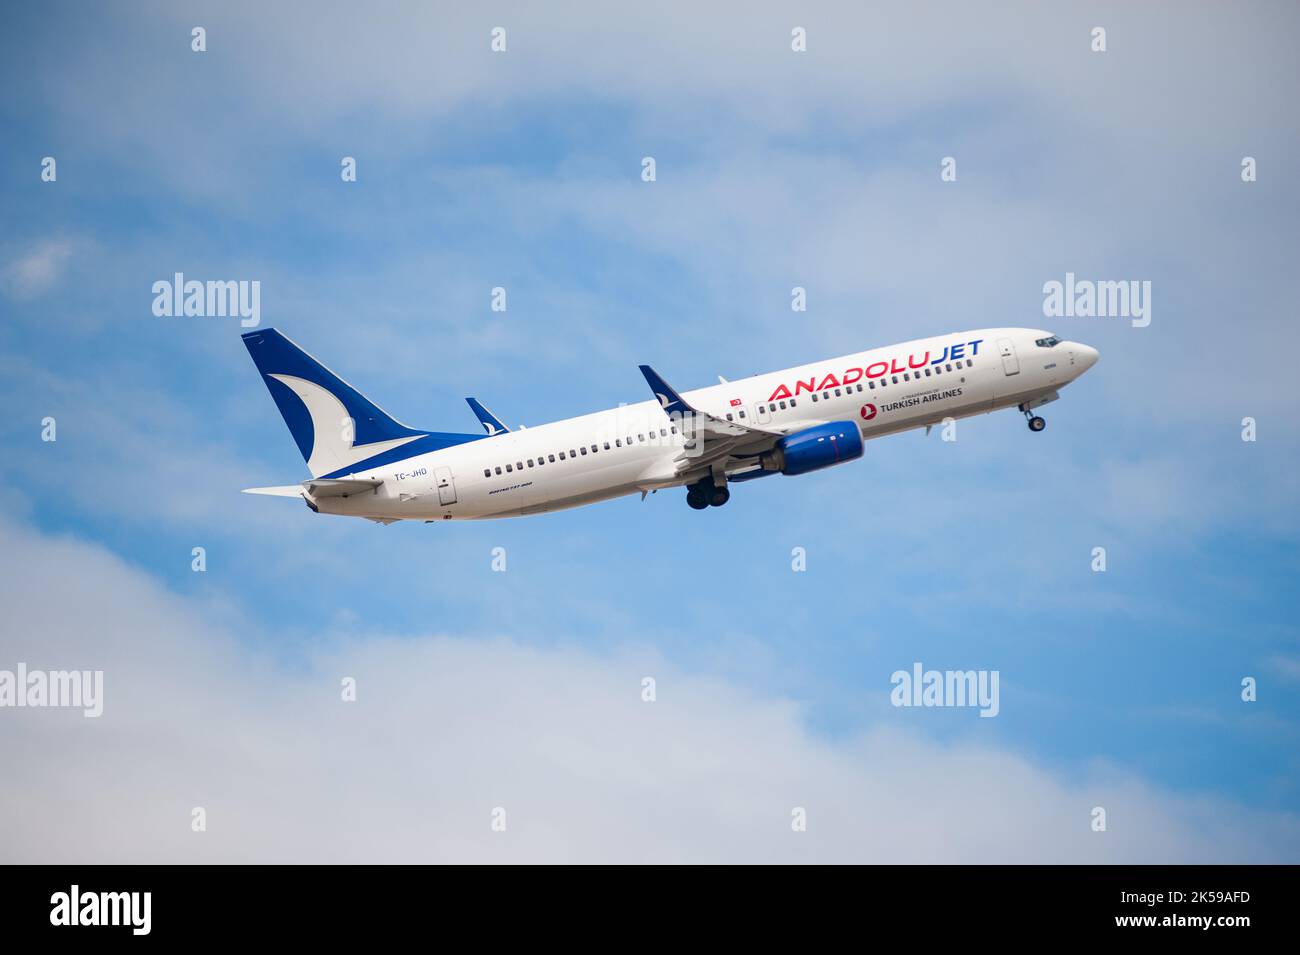 30.08.2022, Germany, Berlin - An AnadoluJet passenger aircraft of type Boeing 737-800 with registration TC-JHD taking off from Berlin Brandenburg BER Stock Photo